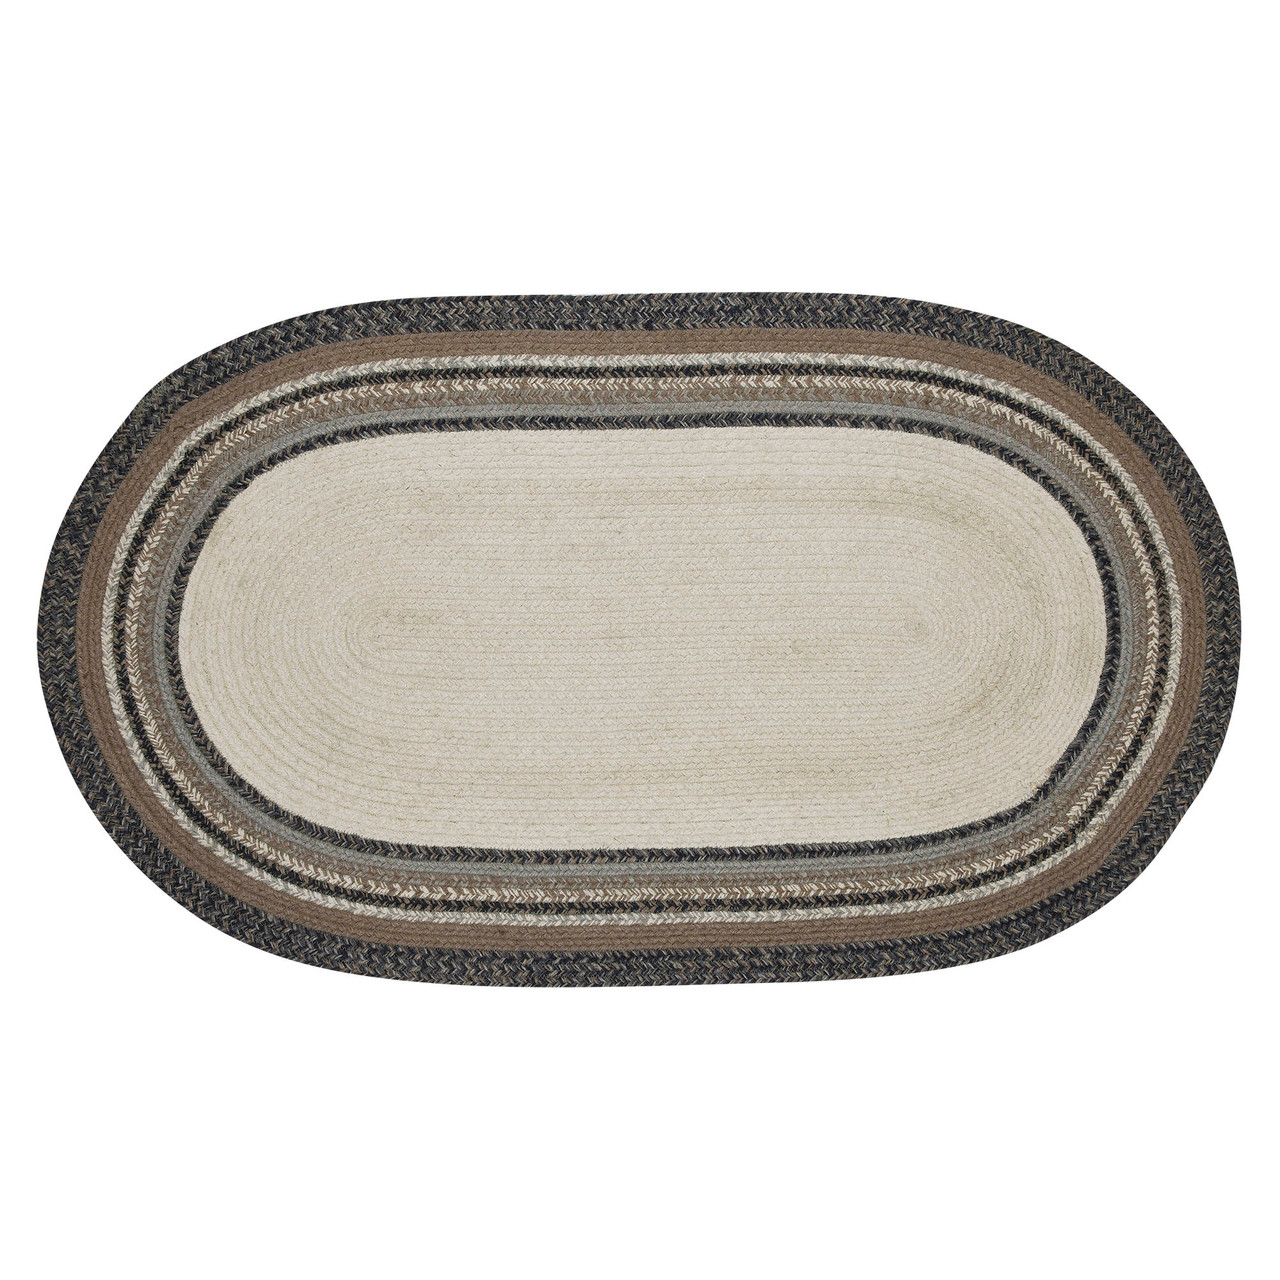 Vining Florals Braided Oval Rug with Included Rug Pad